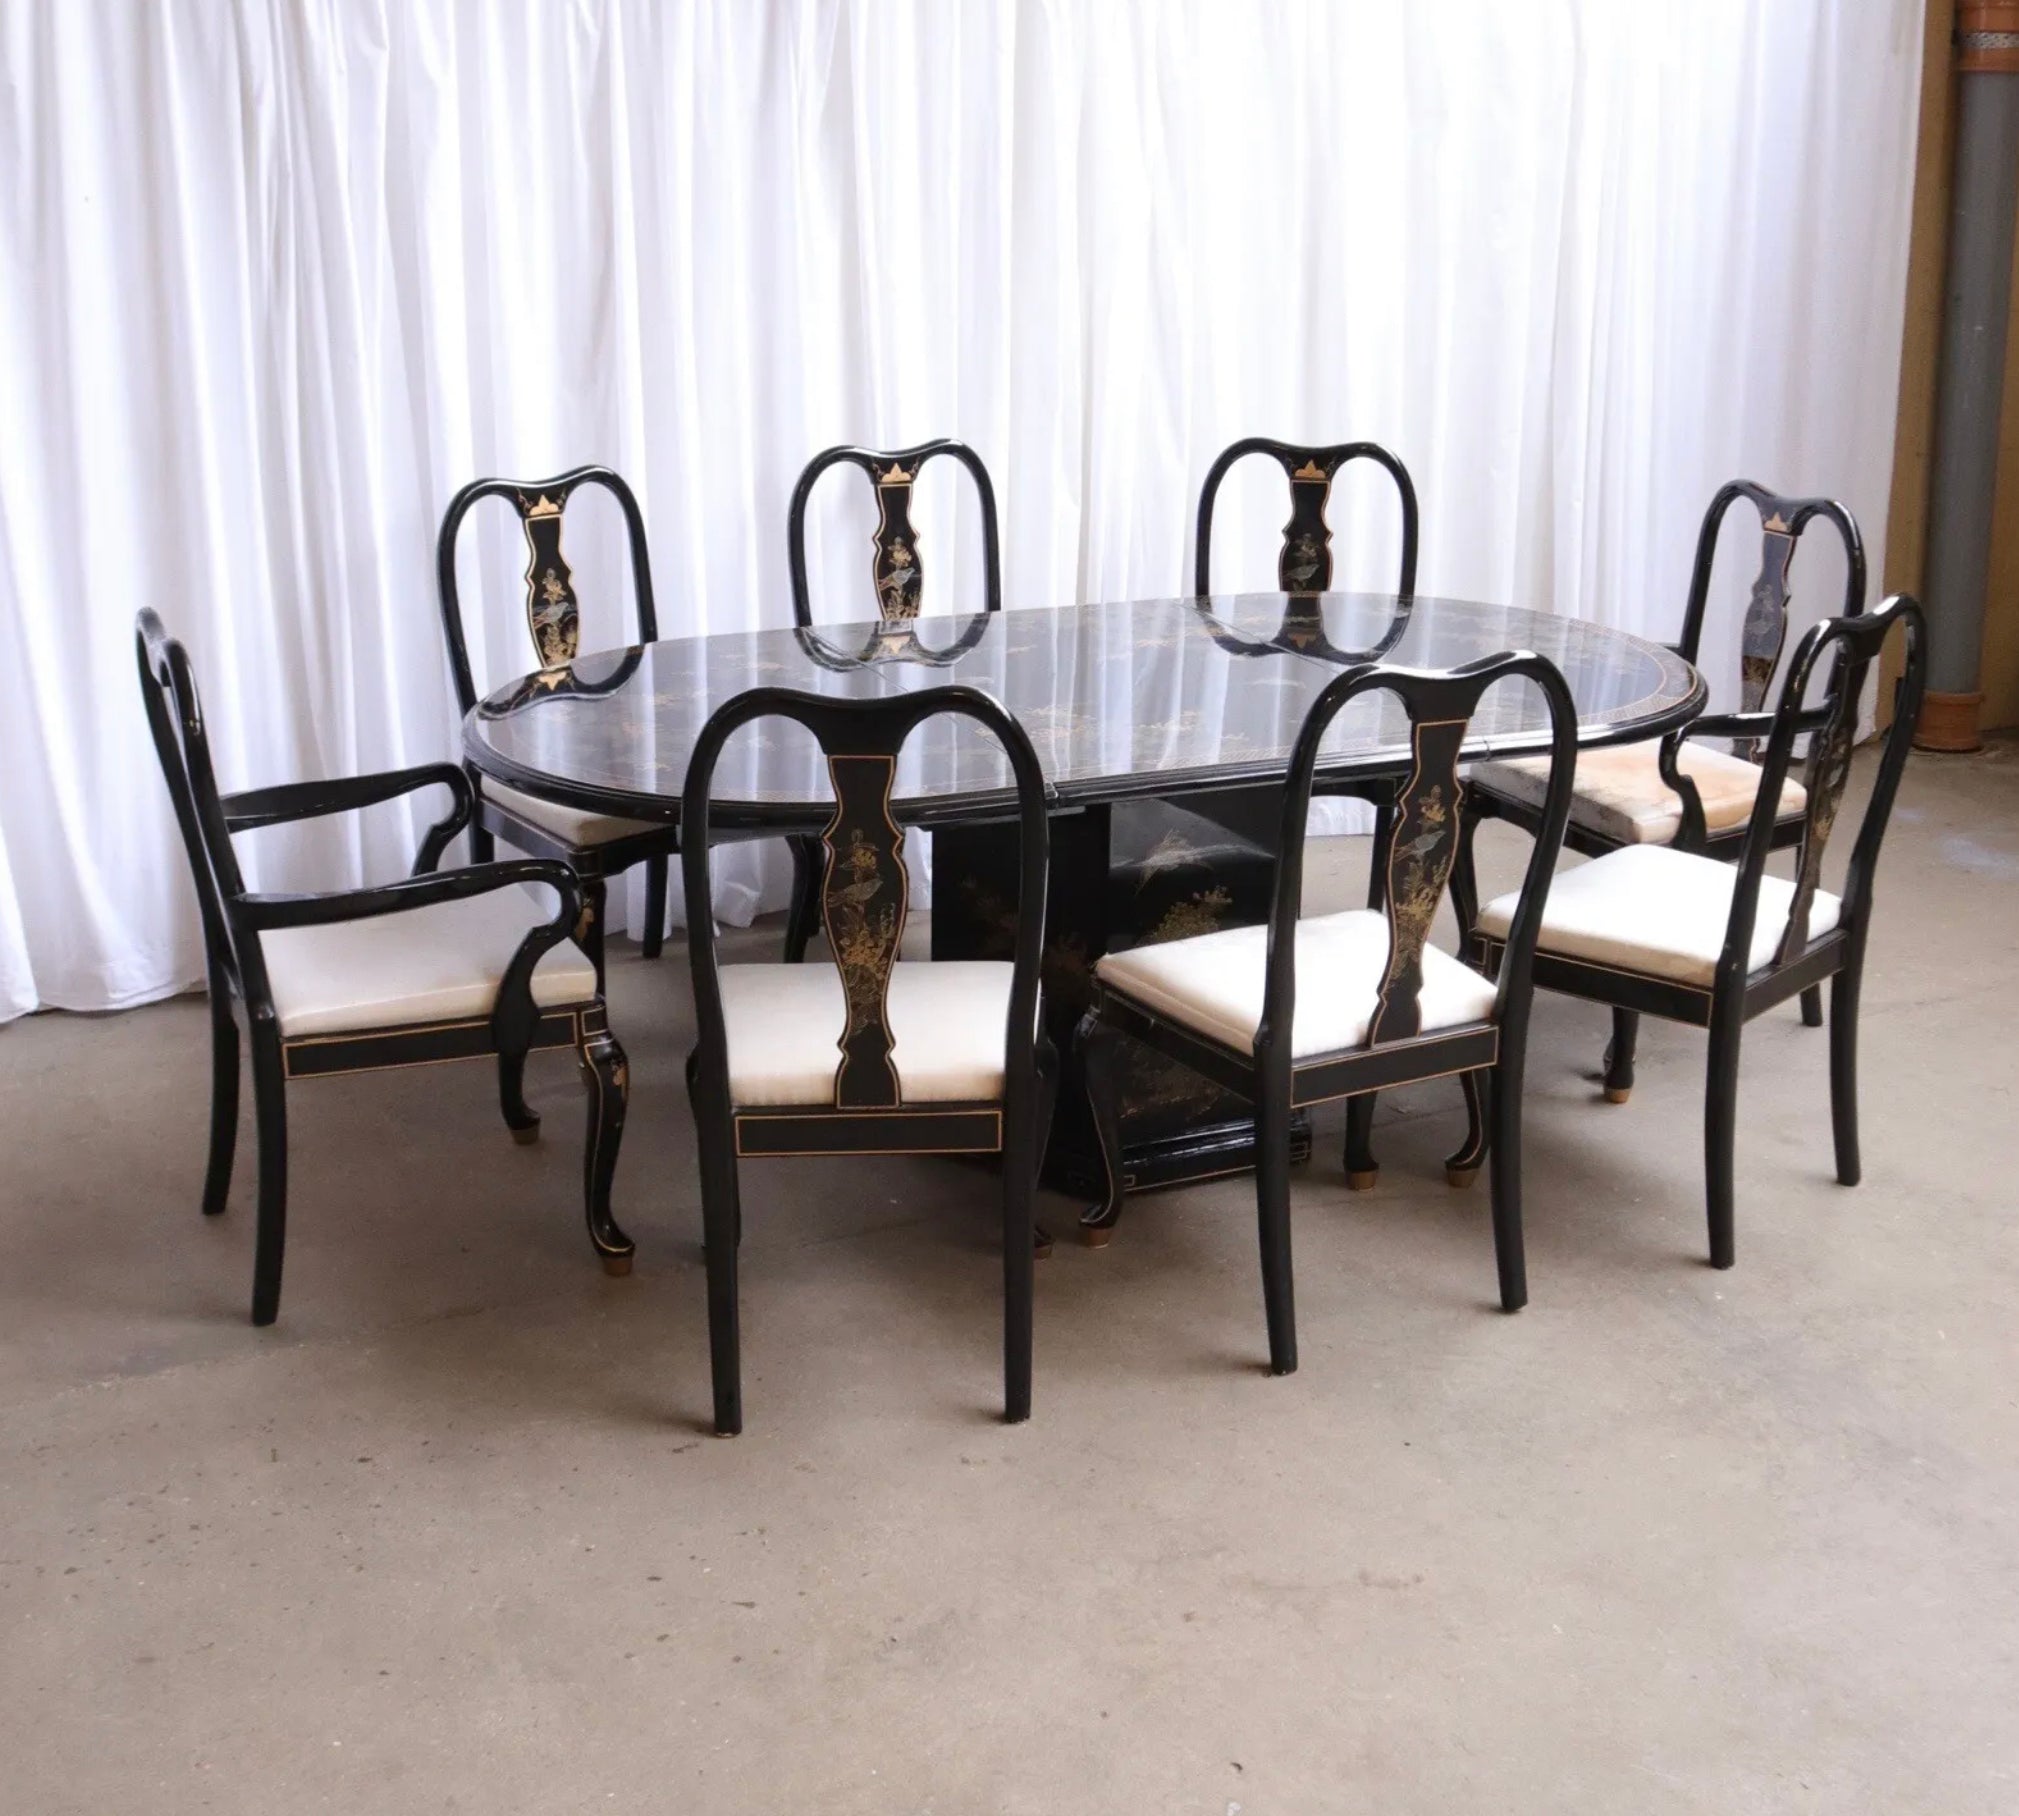 Oriental Chinese Black Lacquered Dining Table And 8 Chairs Vintage Asian - teakyfinders